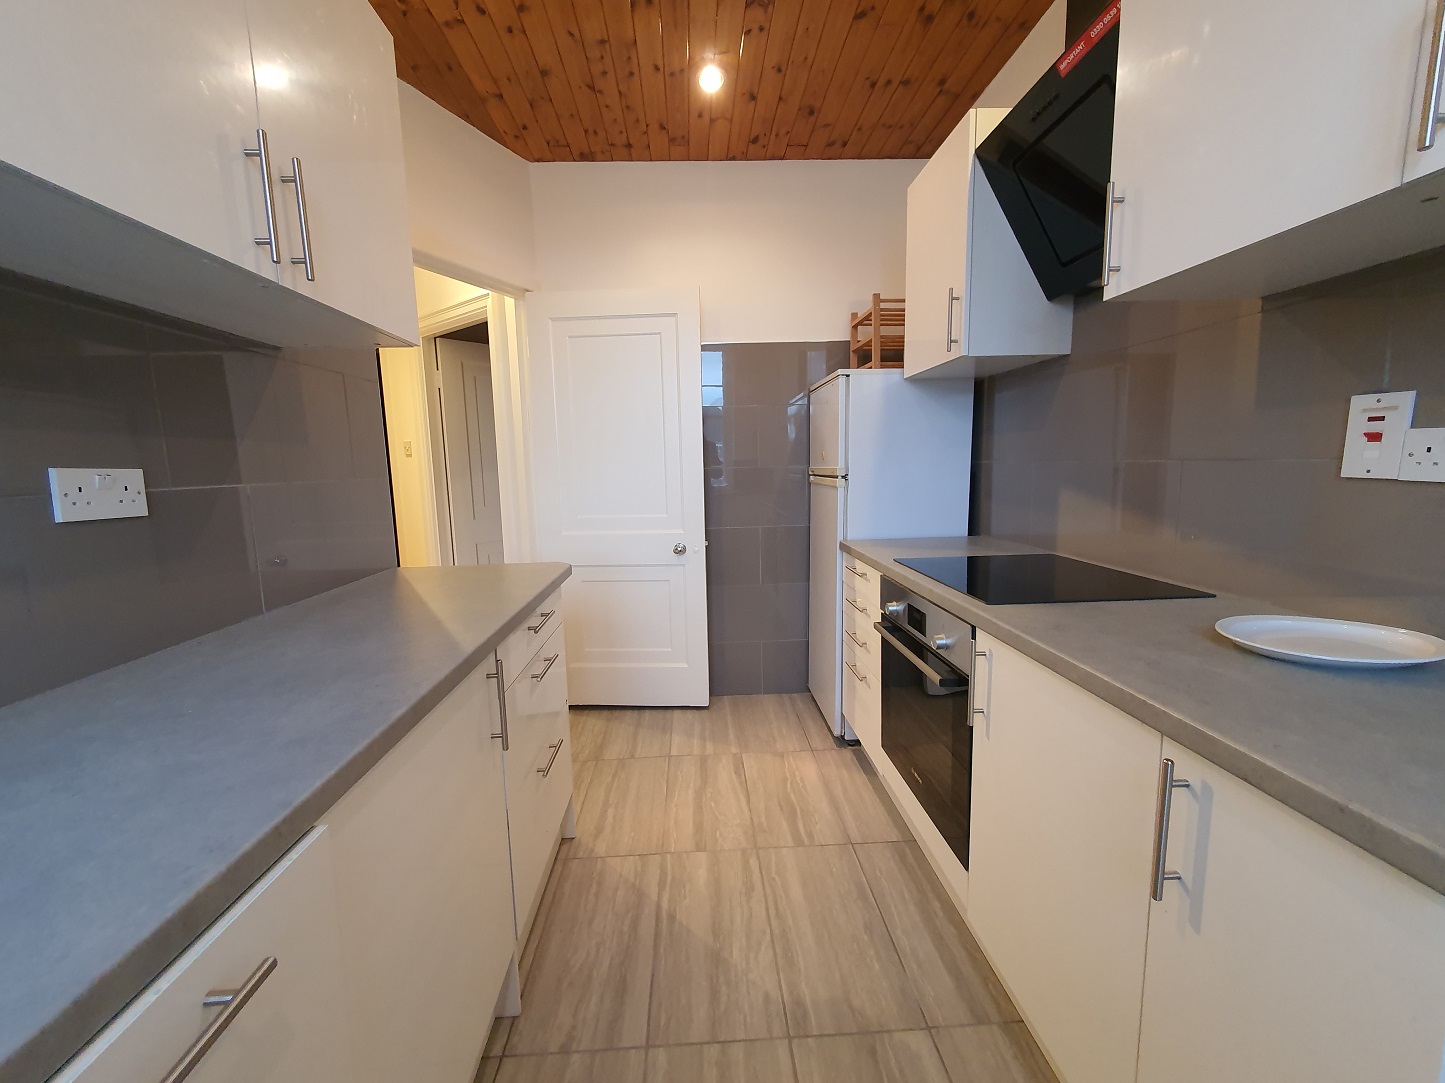 Stunning 2 bedroom flat sharing male,female,couples are welcome RoomsLocal image